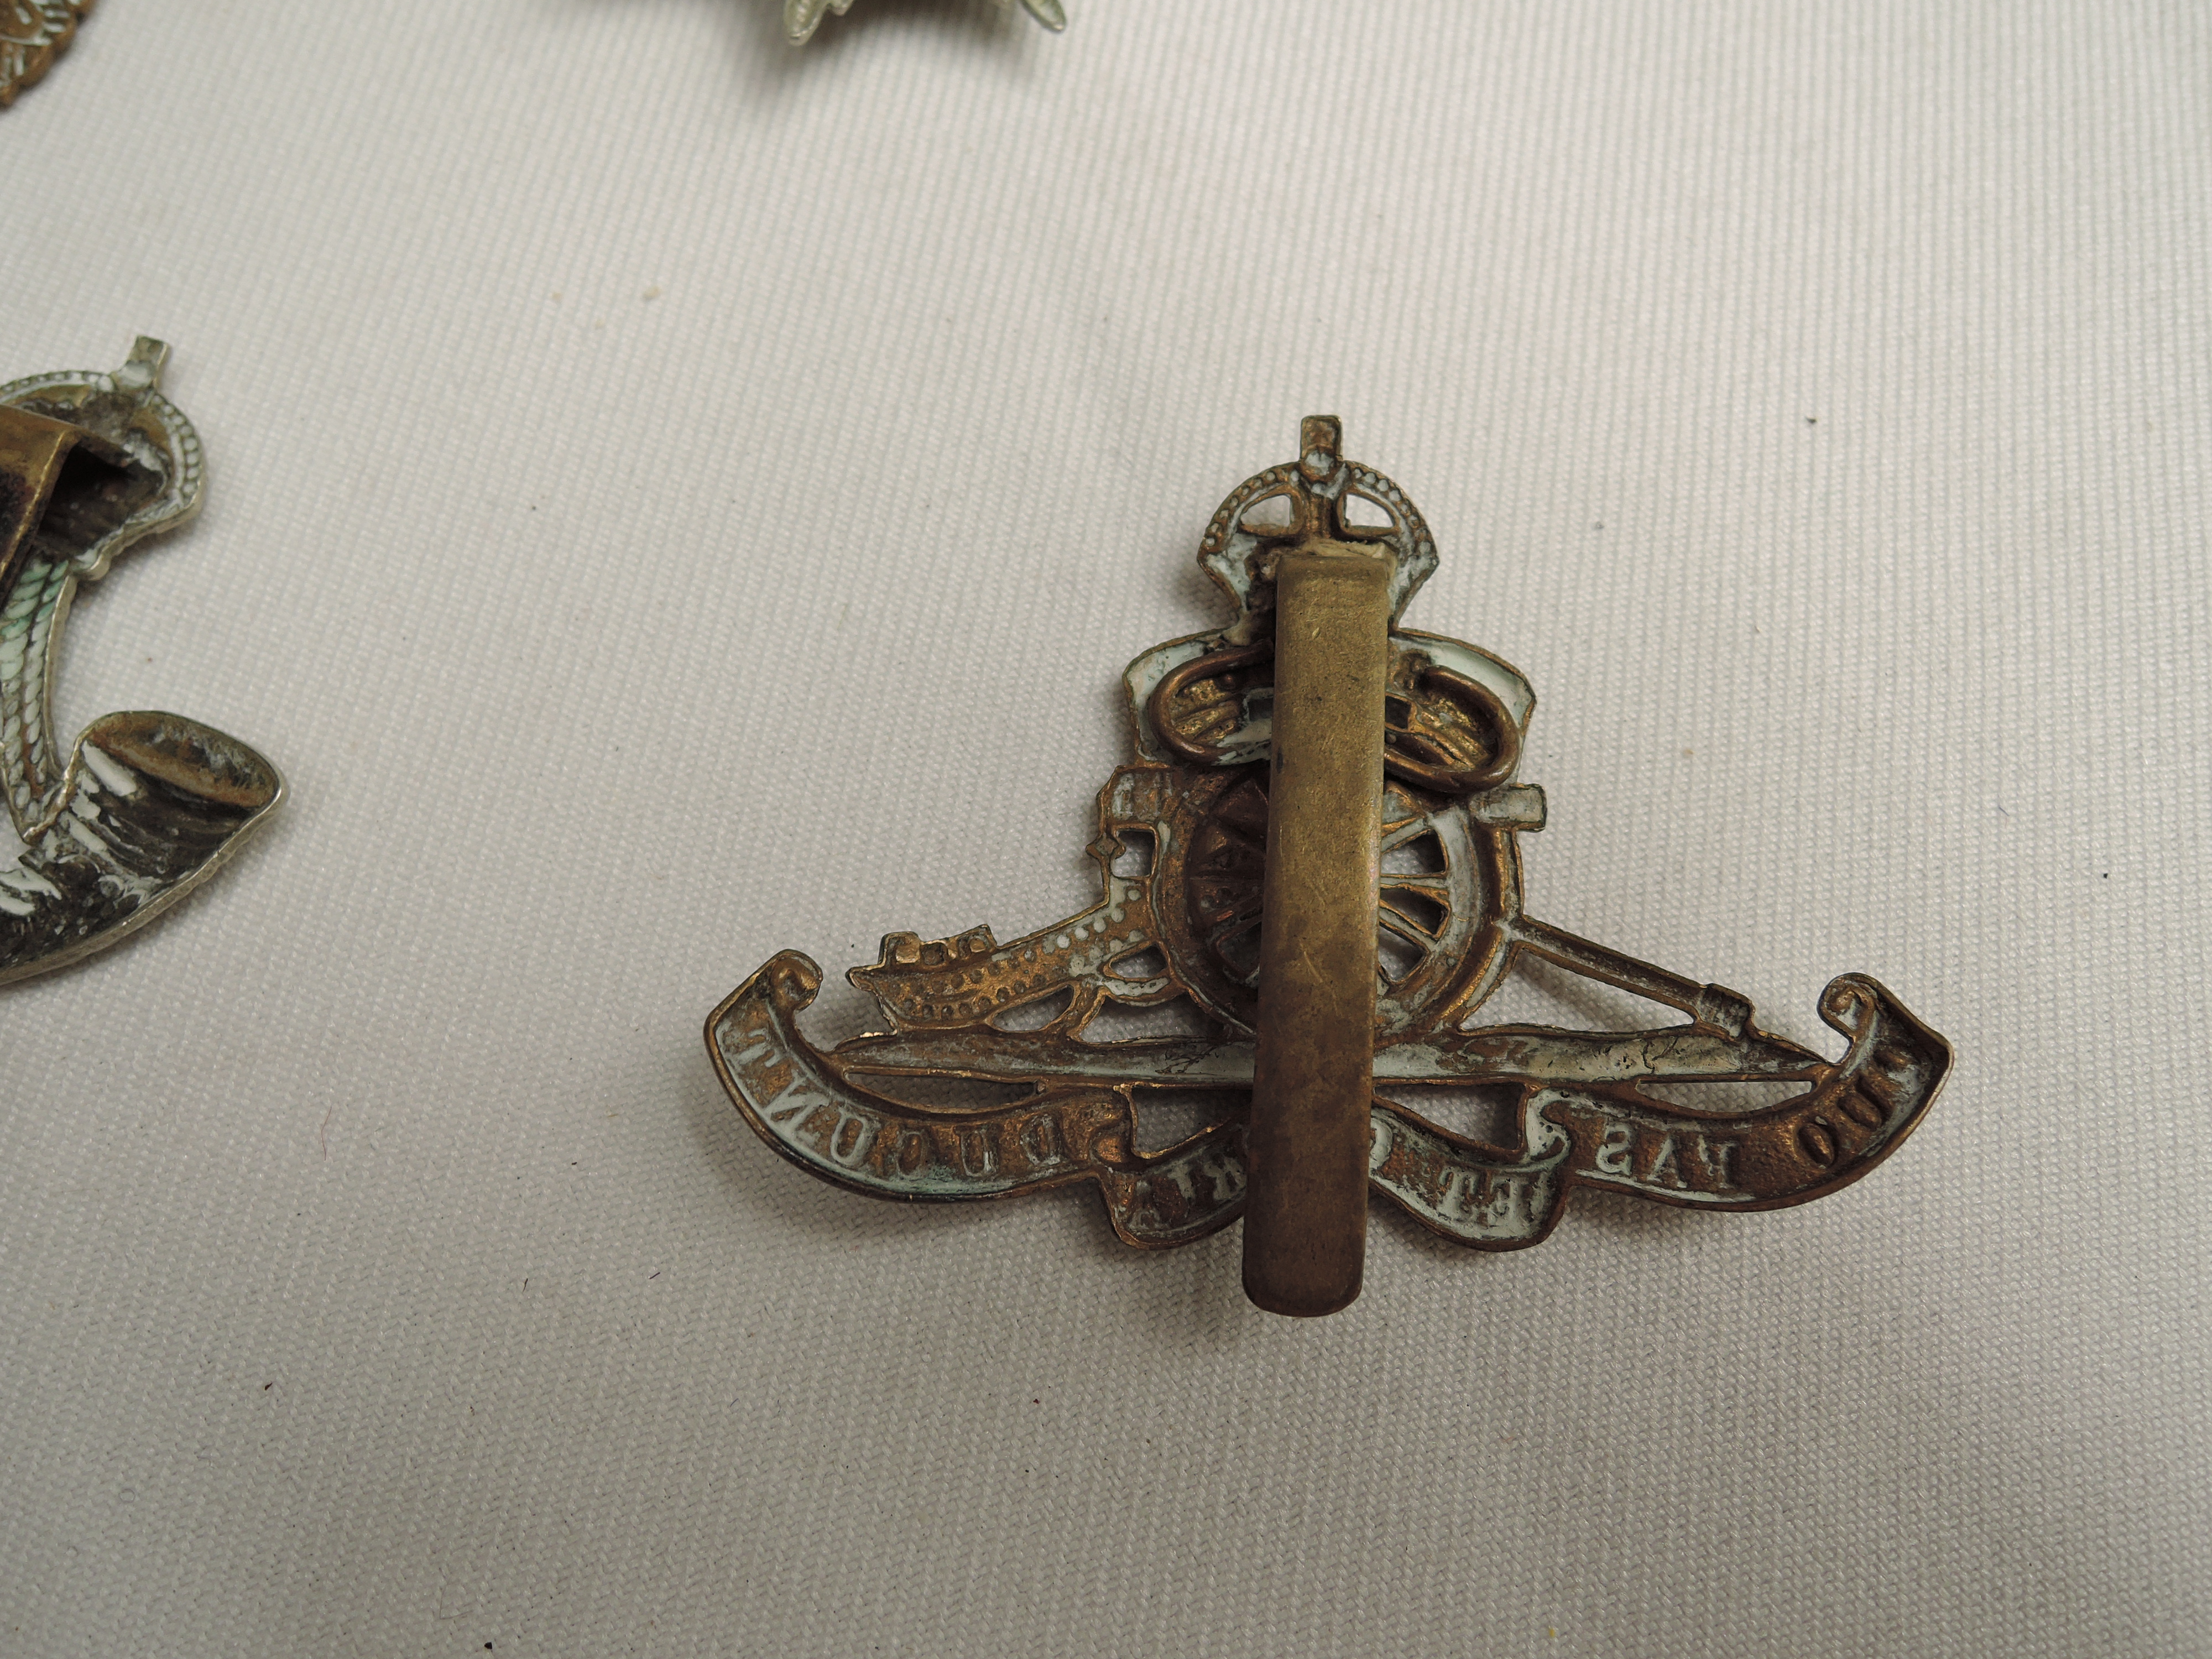 A collection of Army/Military Cap Badges along with a small collection of Coins - Image 3 of 7